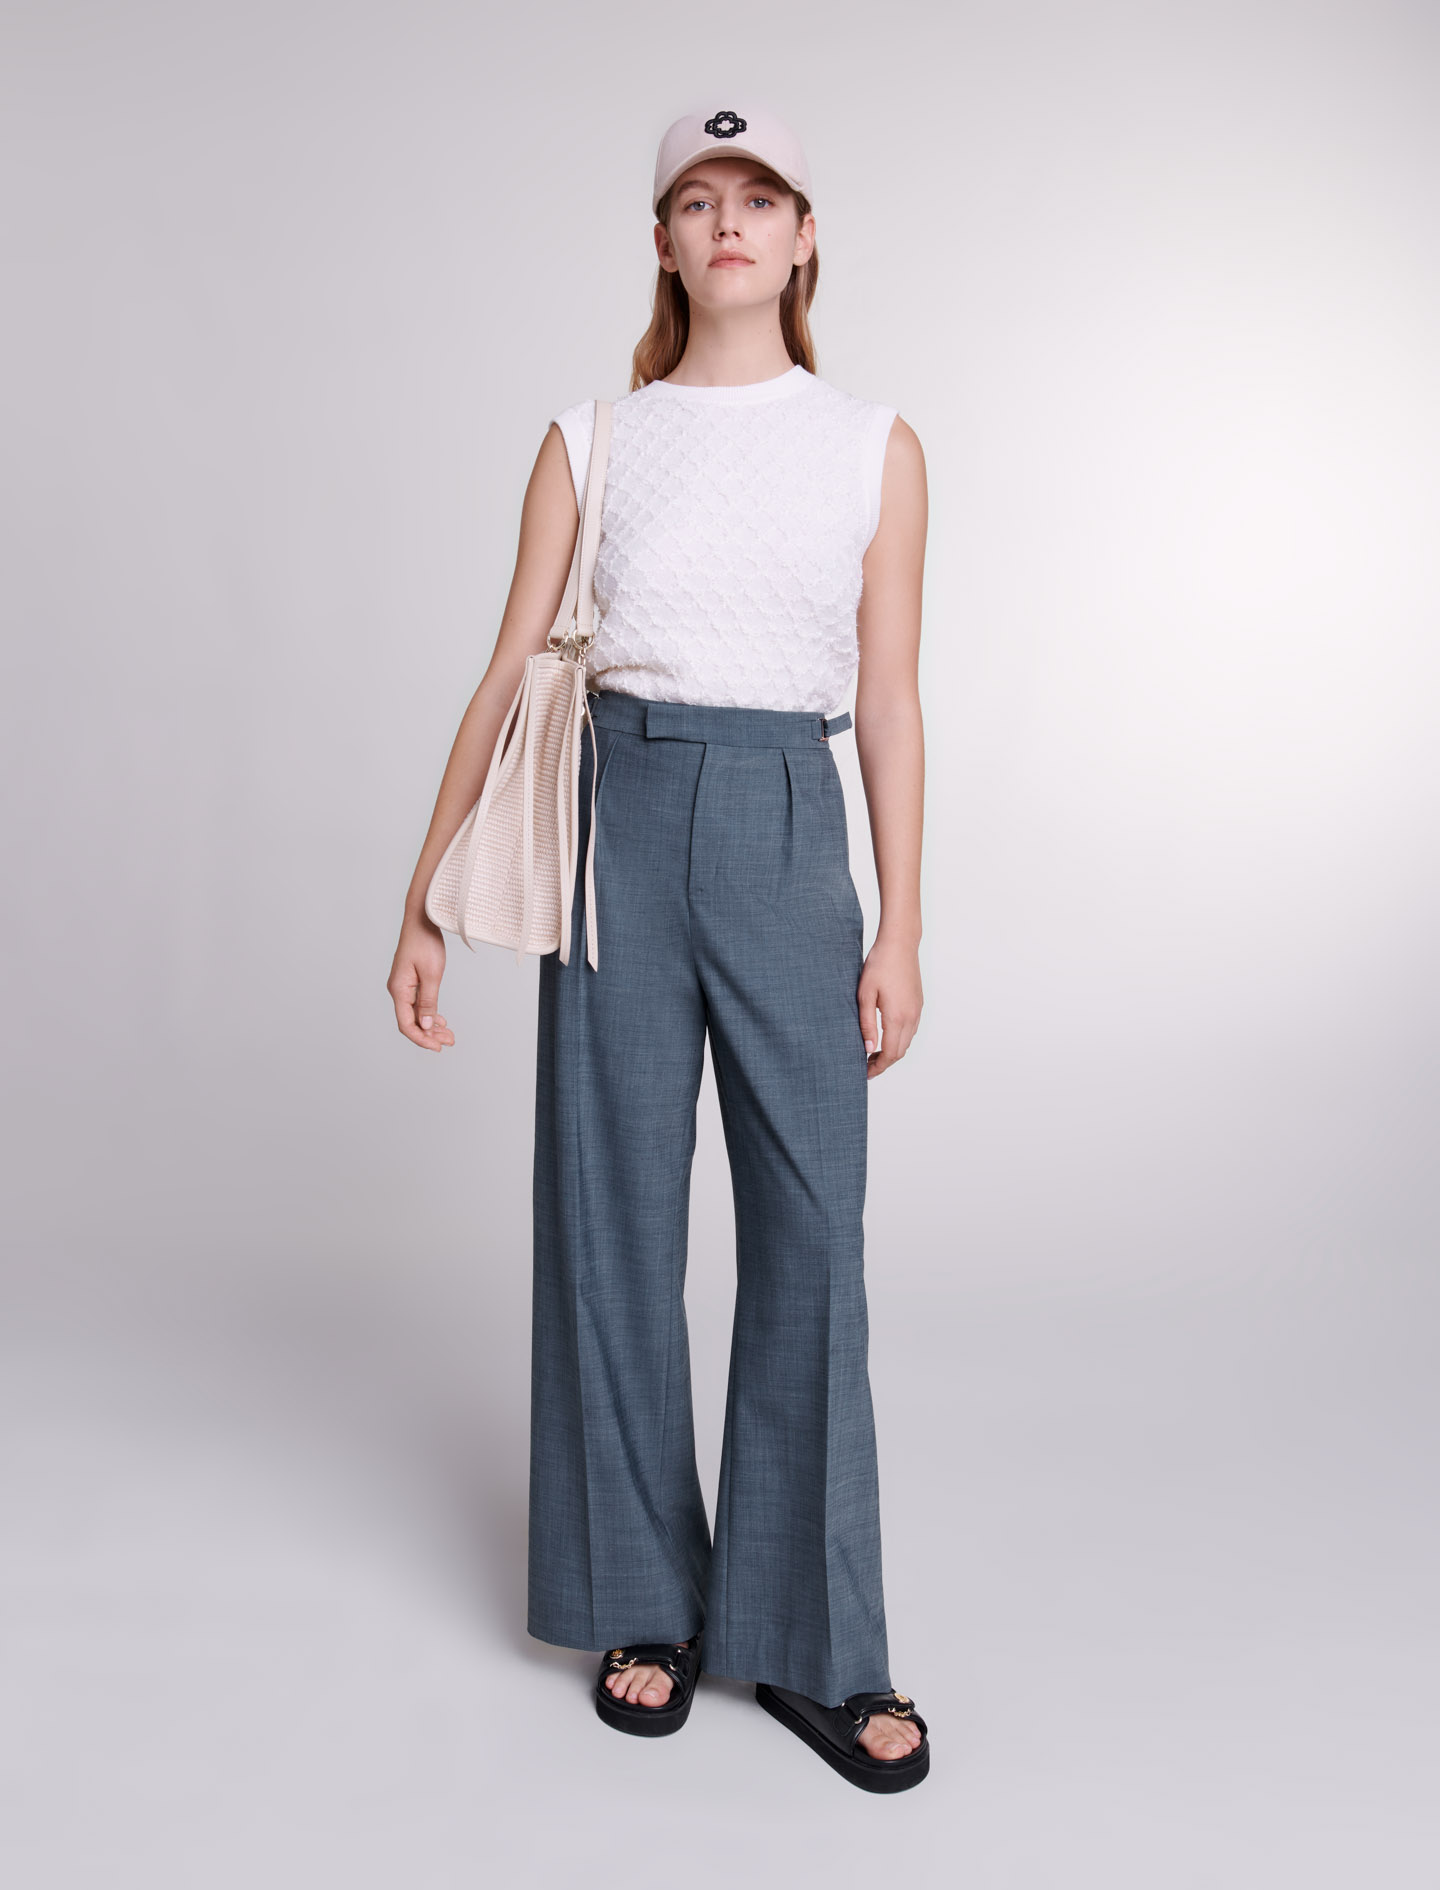 Maje Woman's polyester, Wide-leg trousers for Spring/Summer, in color Petrol Blue /